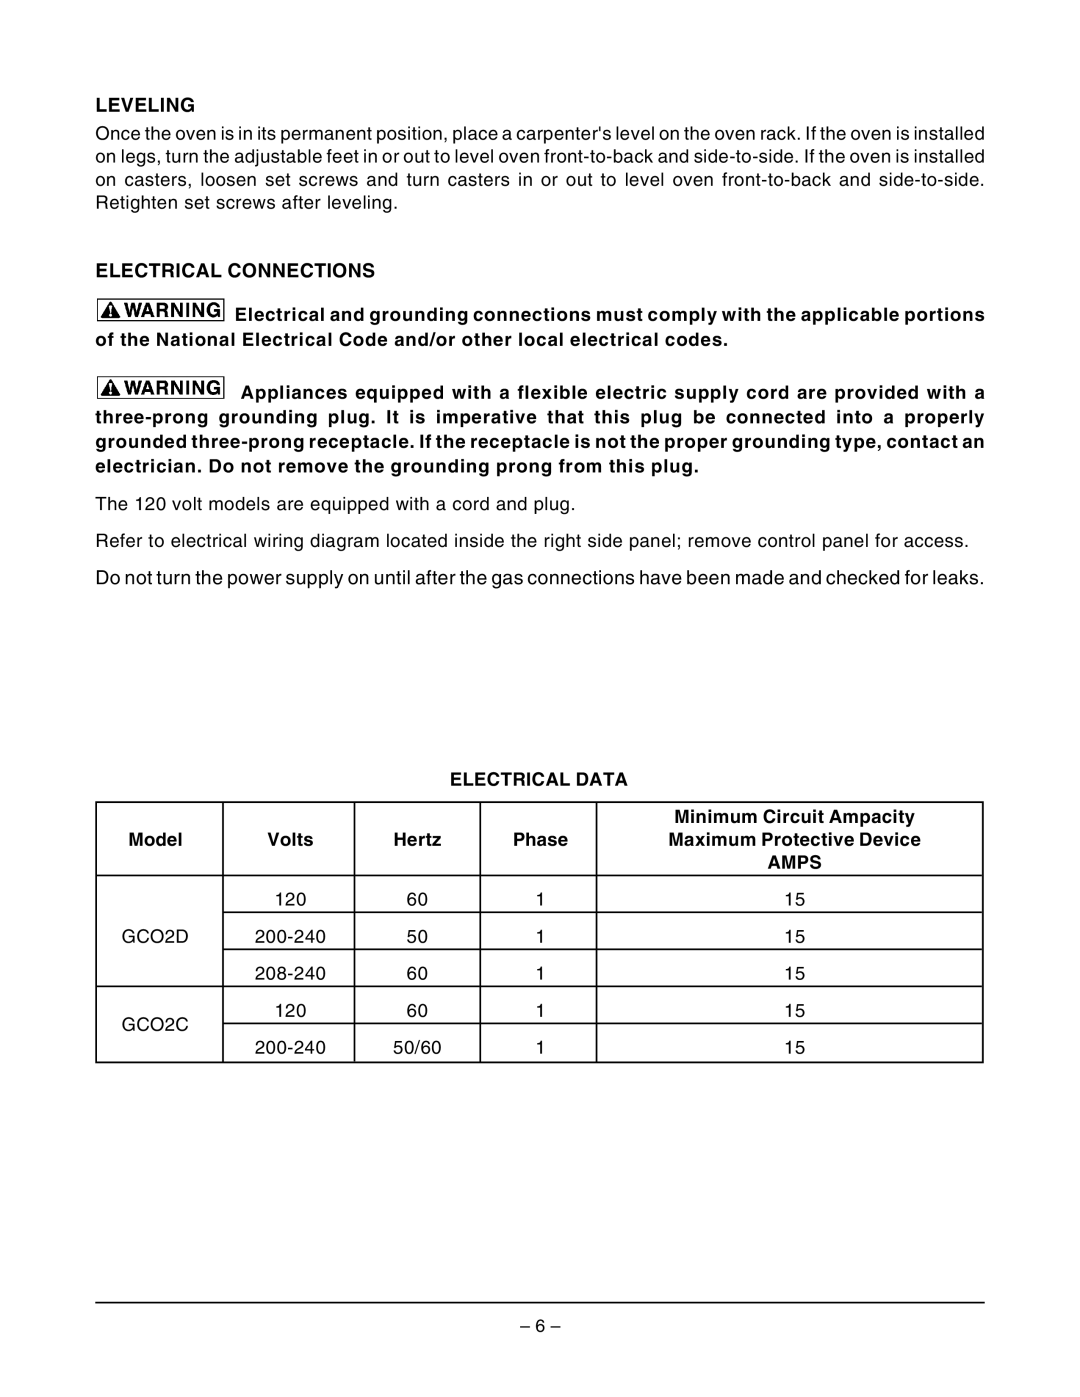 Vulcan-Hart GCO2C ML-114571, GCO2D ML-114569 operation manual Leveling, Electrical Connections 